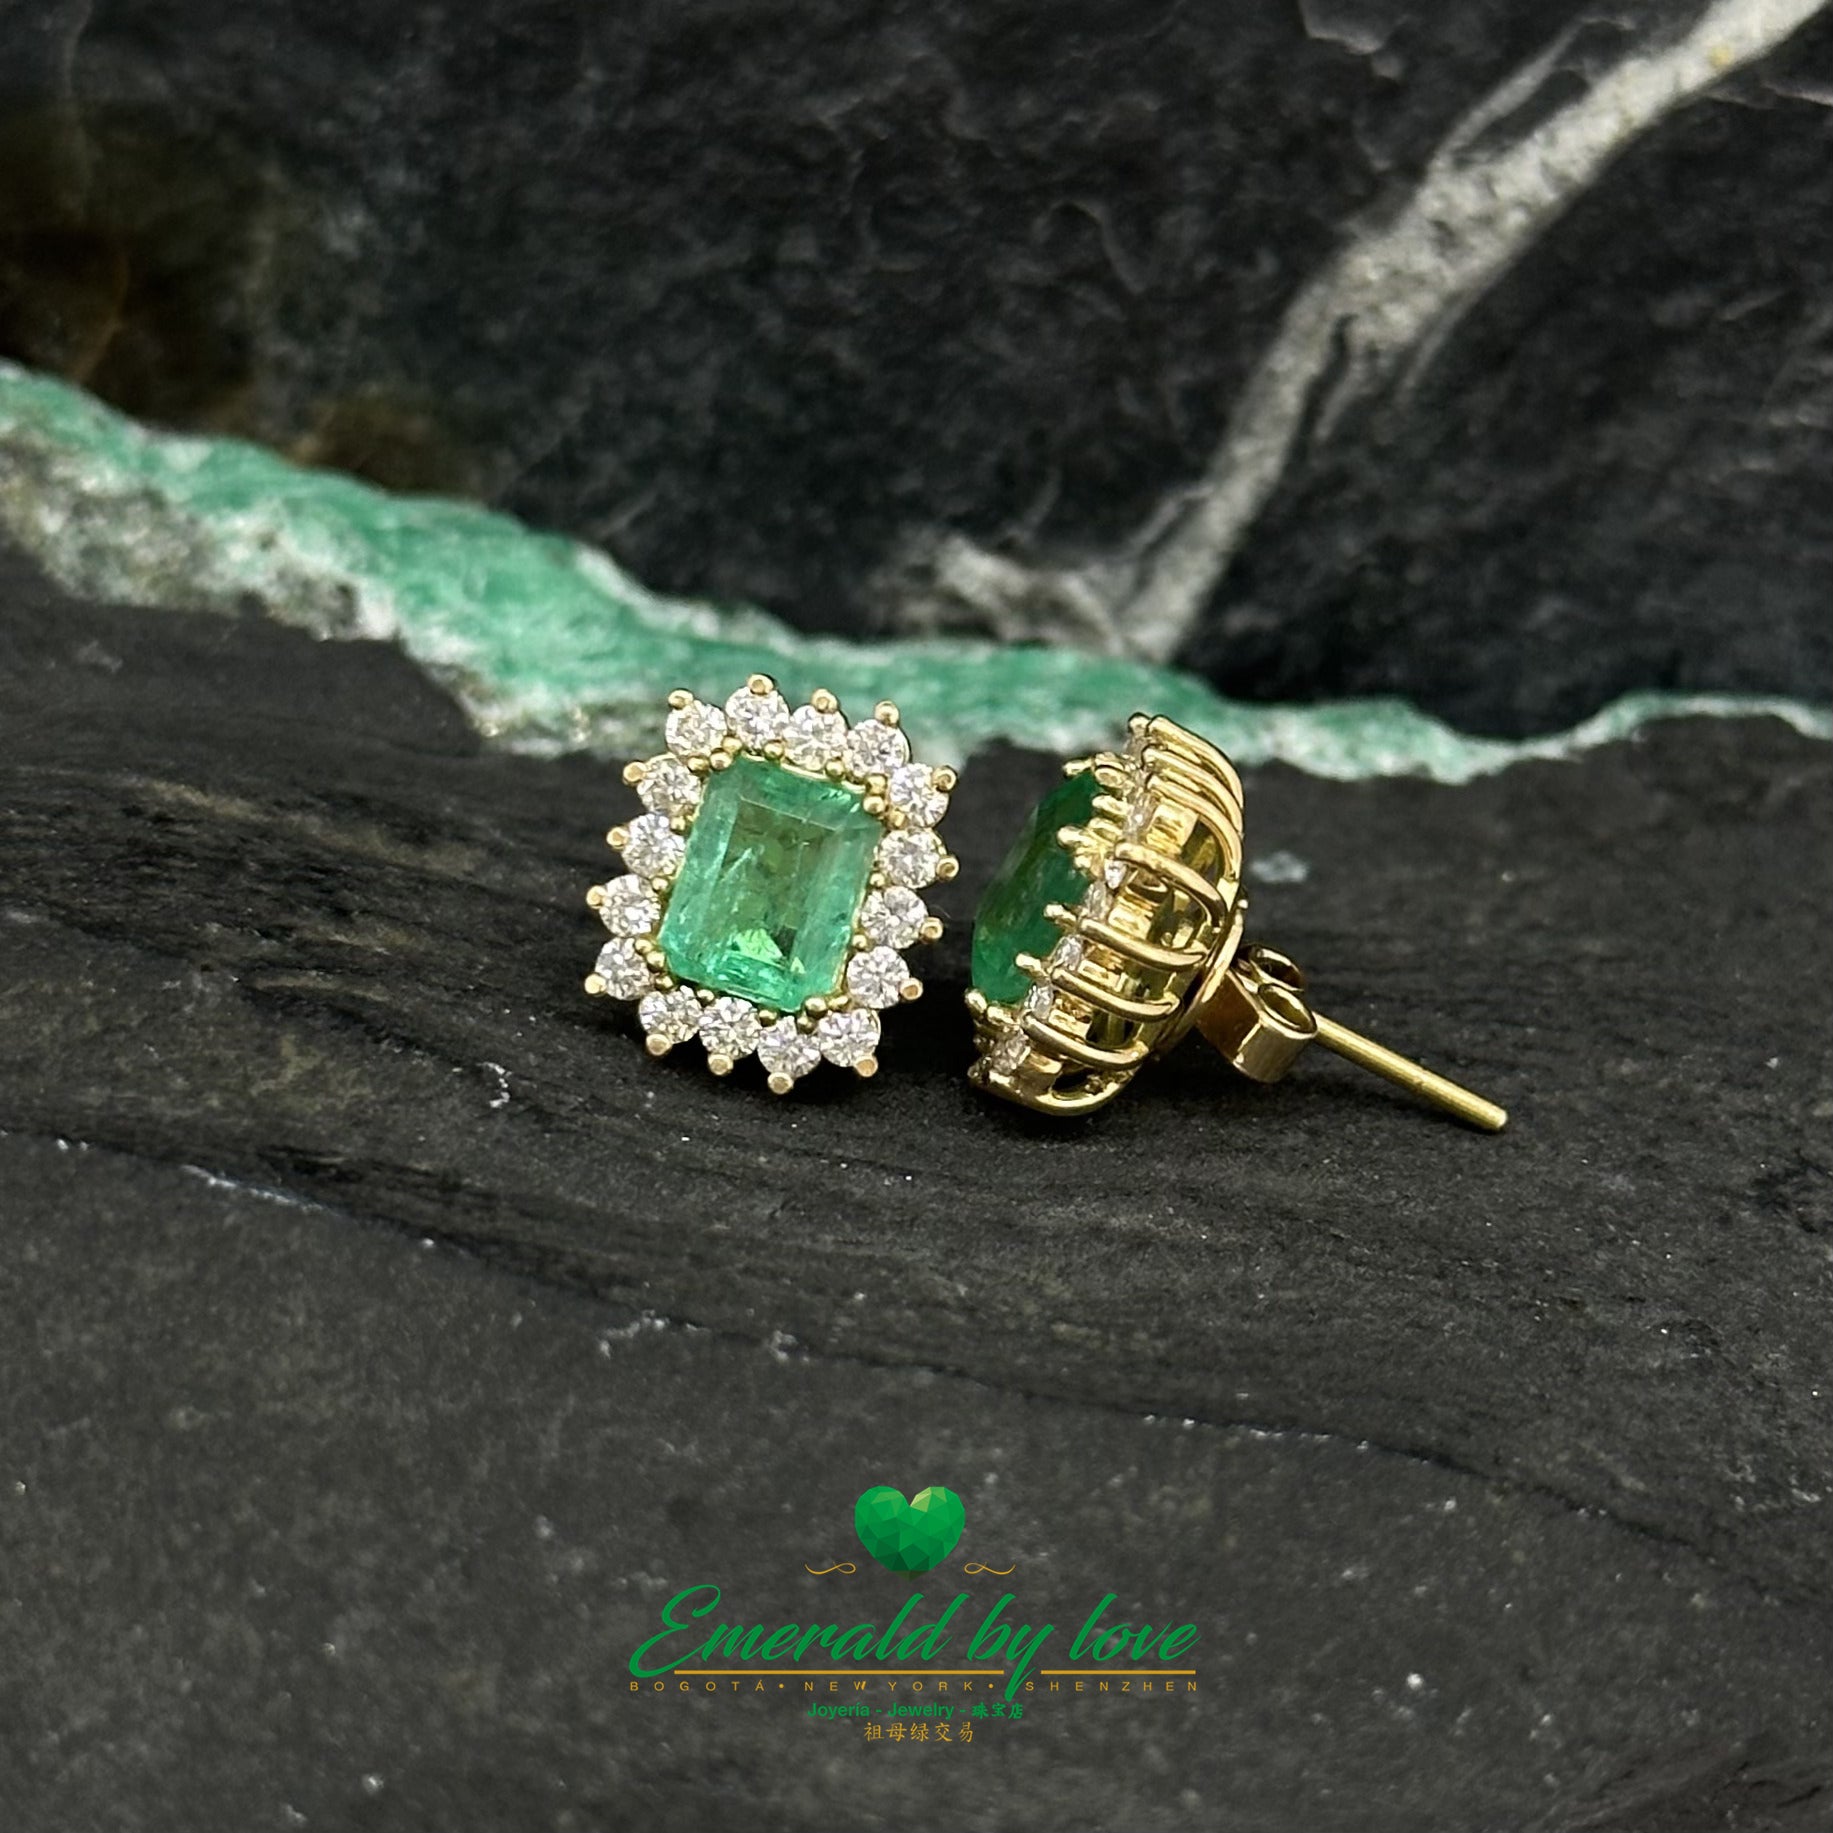 Marquise Cut Colombian Emerald and Diamond Earrings: Exquisite Rectangular Crystals